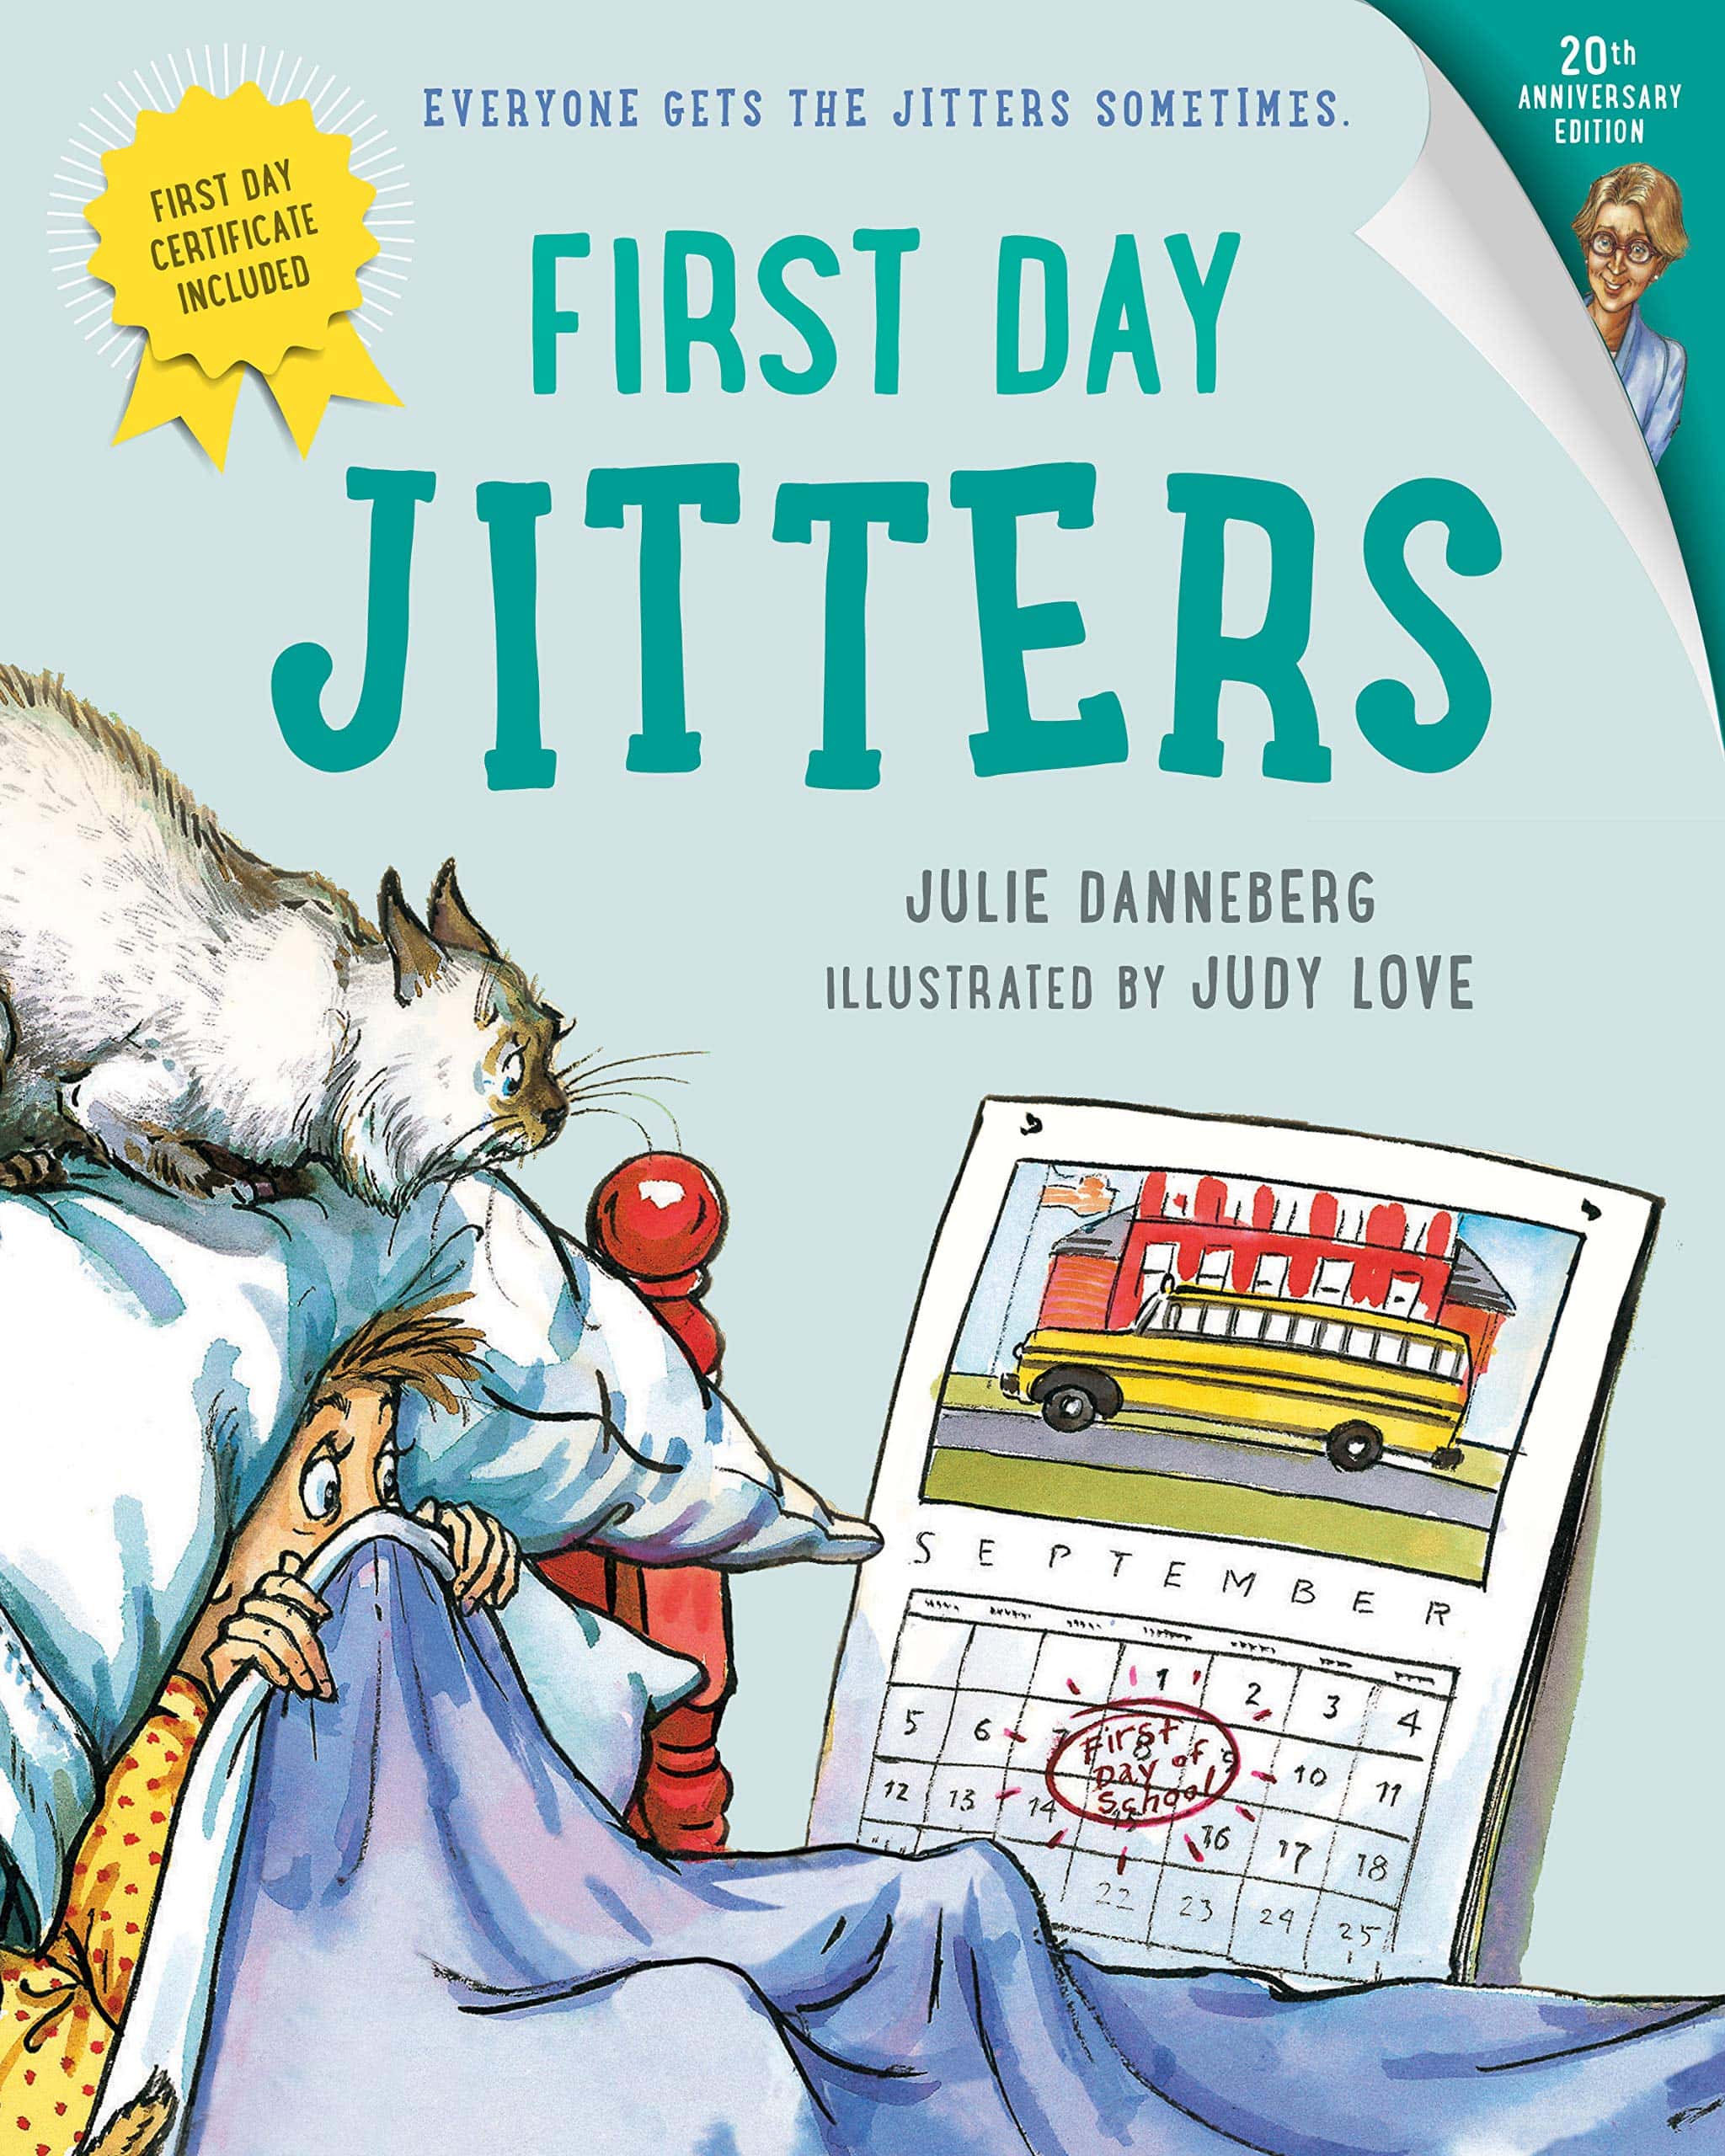 "First Day Jitters" by Julie Danneberg